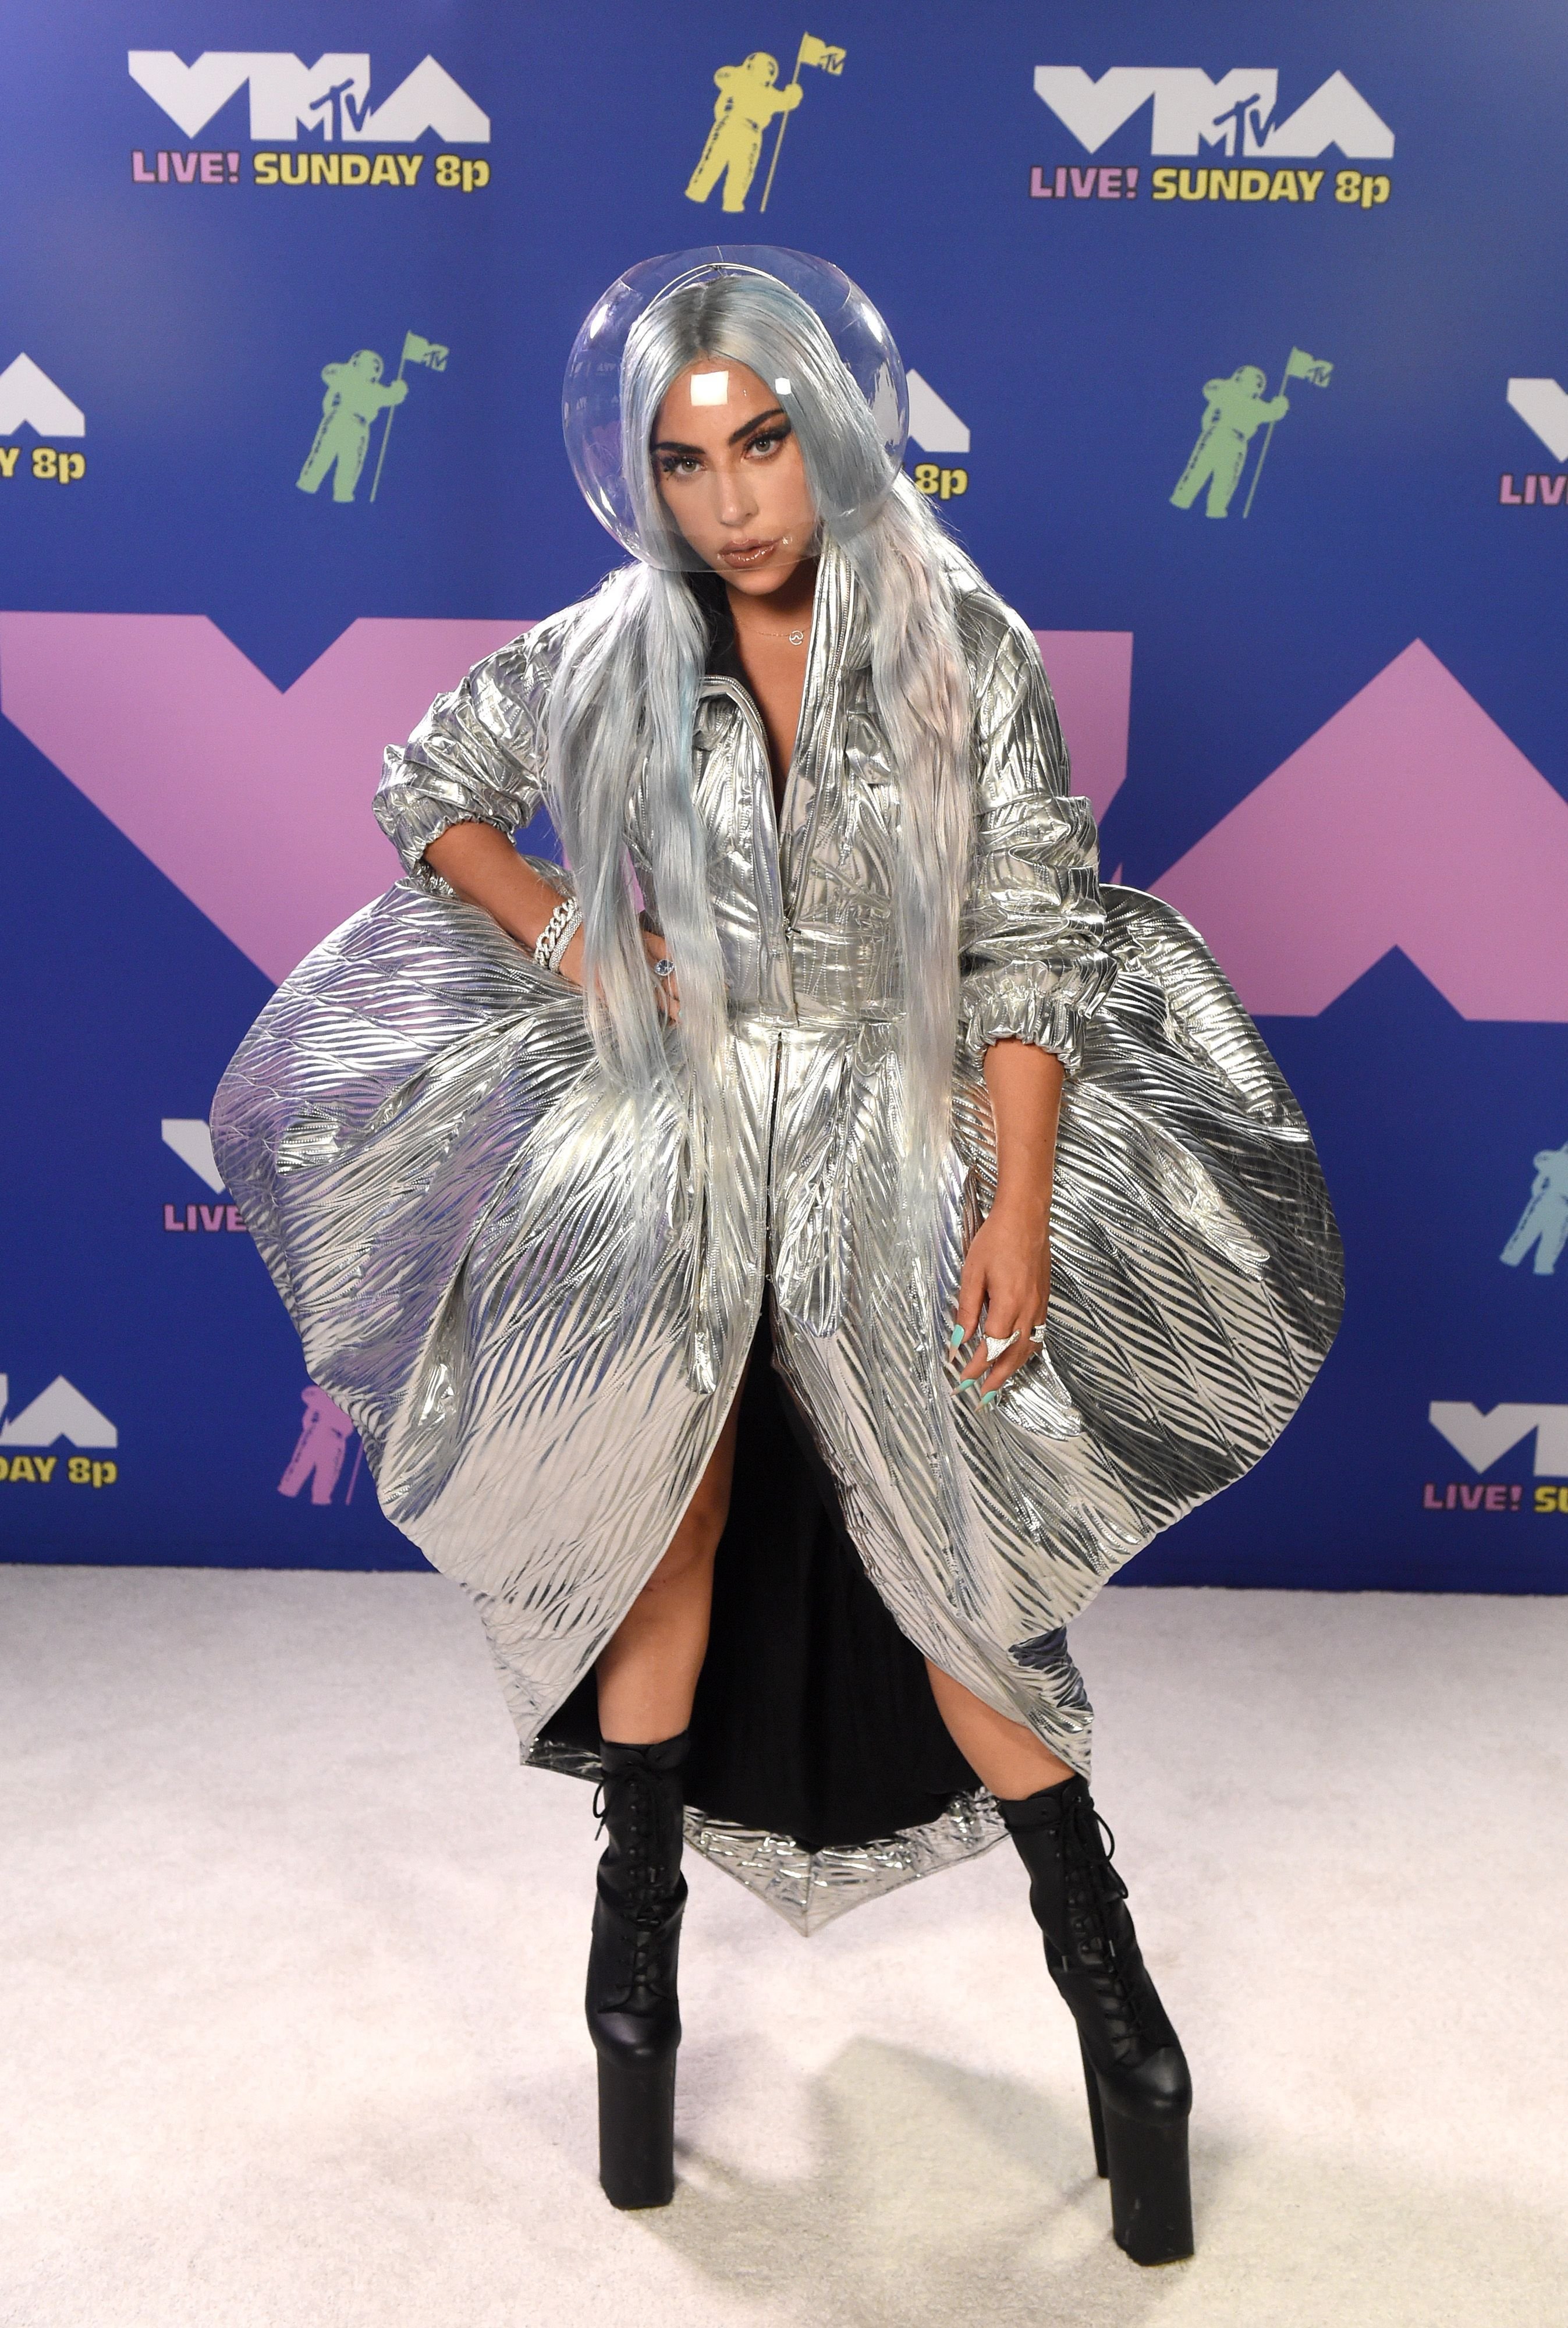 Lady Gaga at the 2020 MTV Video Music Awards on August 30th 2020 | Getty Images 